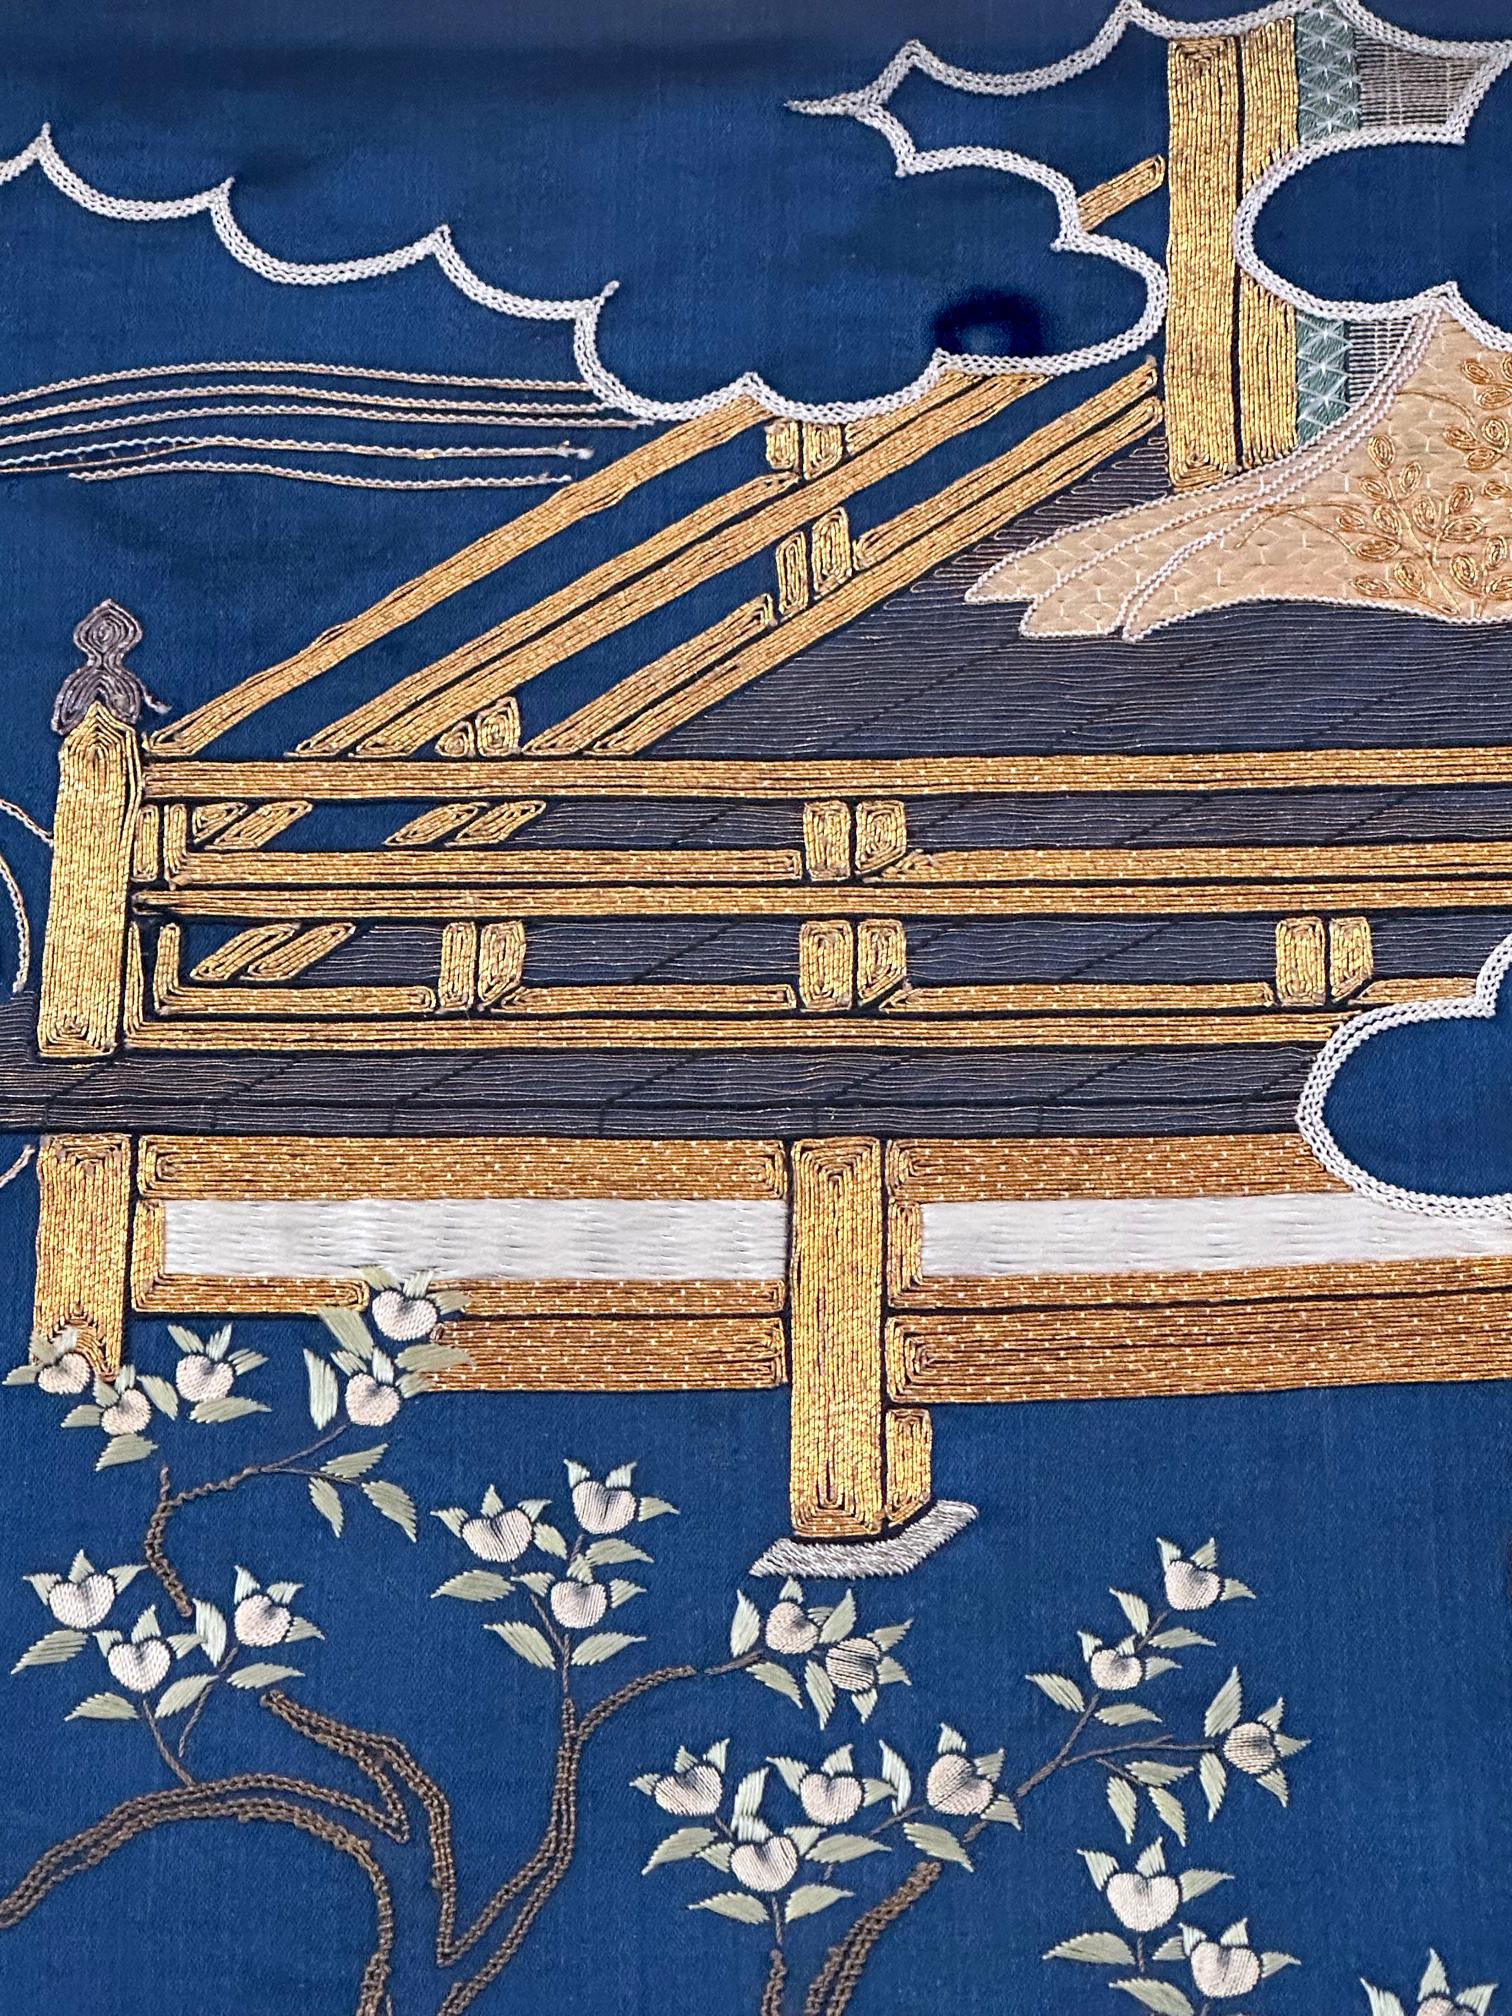 Framed Antique Japanese Embroidery Fukusa Textile Panel For Sale 13